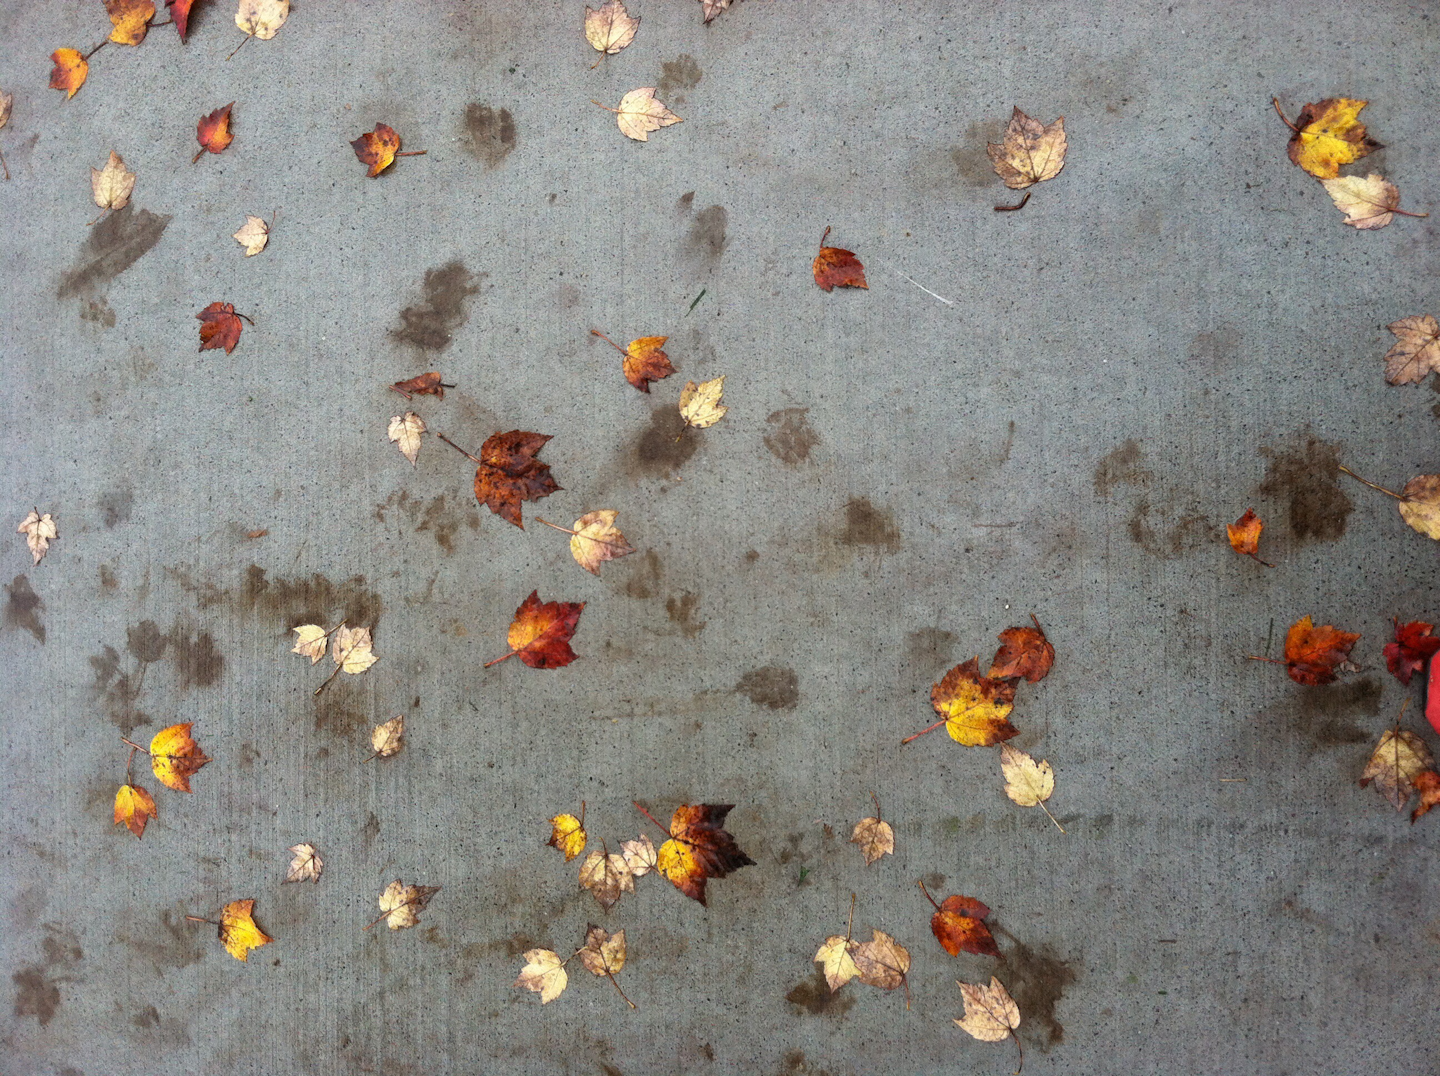 How To Prevent Leaves From Staining, How To Remove Leaf Stains From Concrete Patio